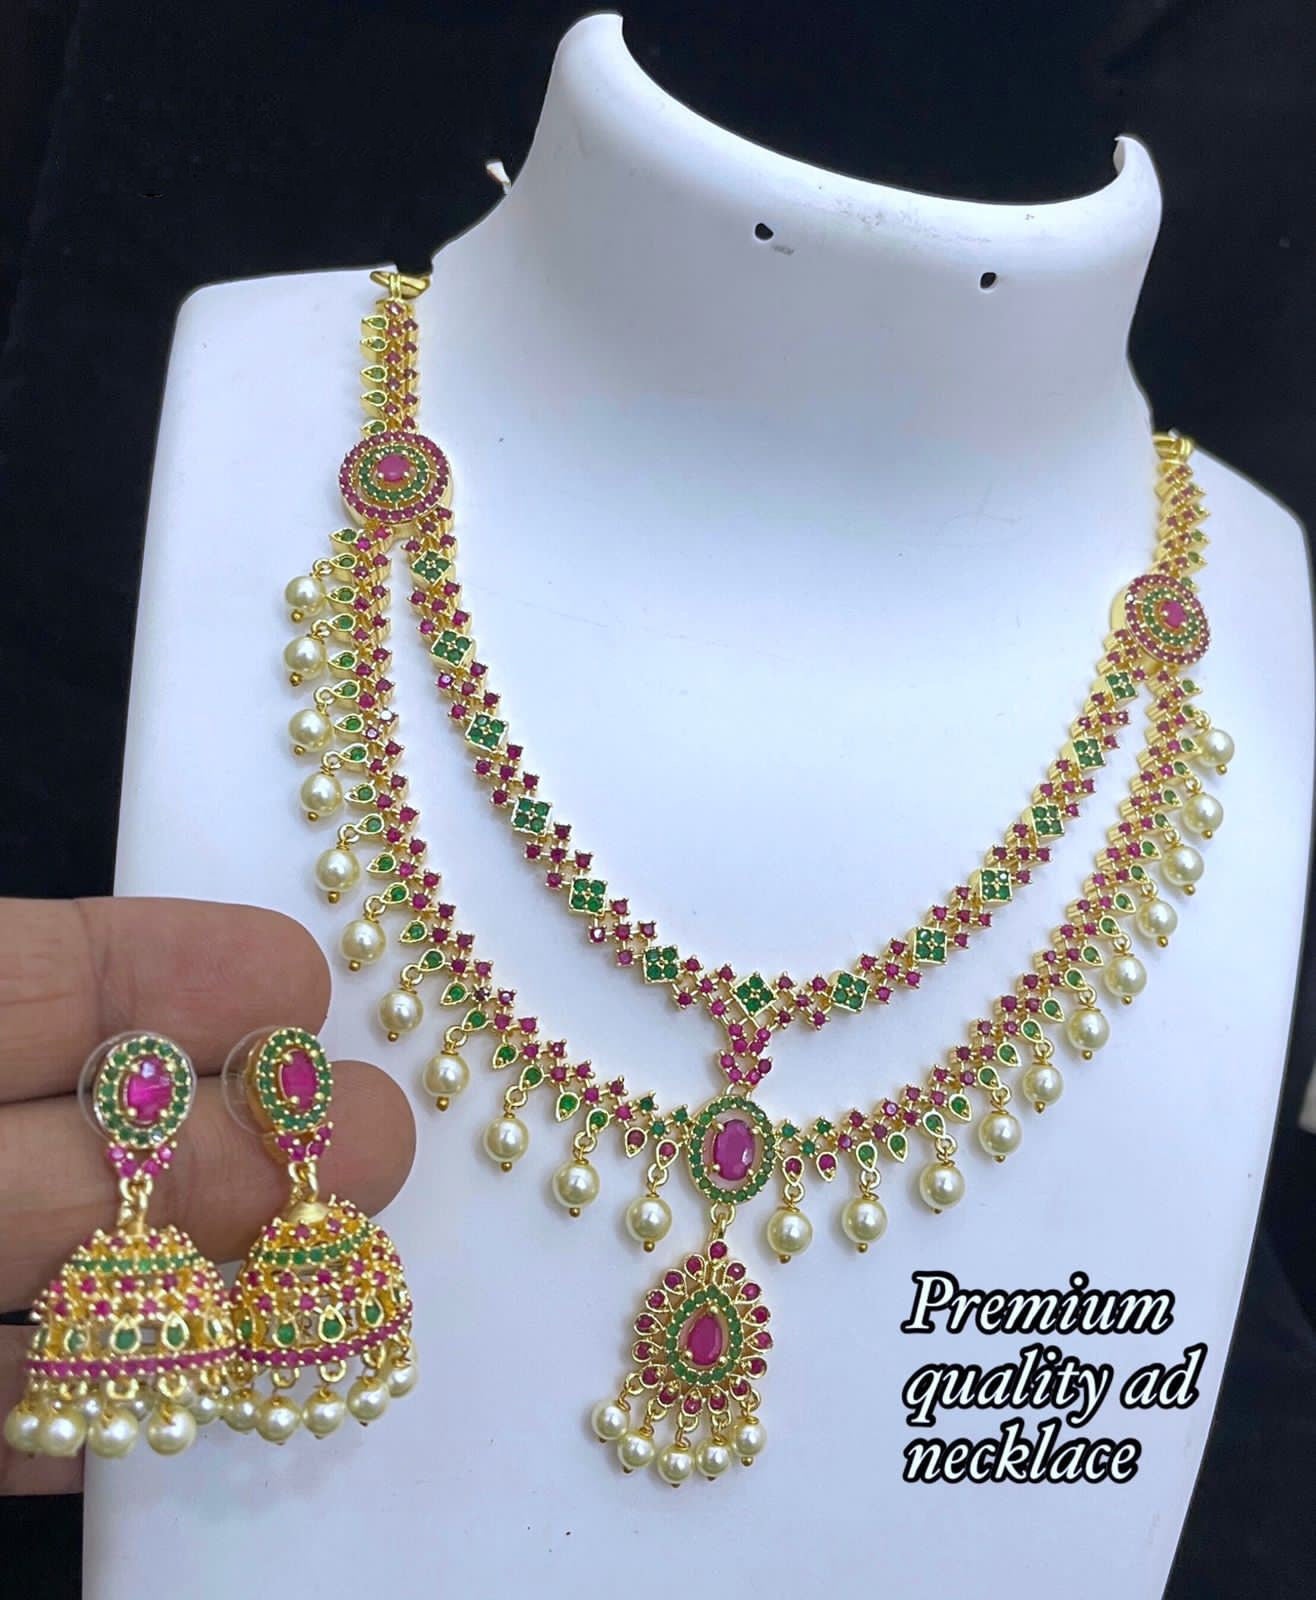 Gorgeous American Diamond Two layer necklace with pearl drops | South Indian style AD color stone Jewelry | Ruby Emerald Crystal Necklace